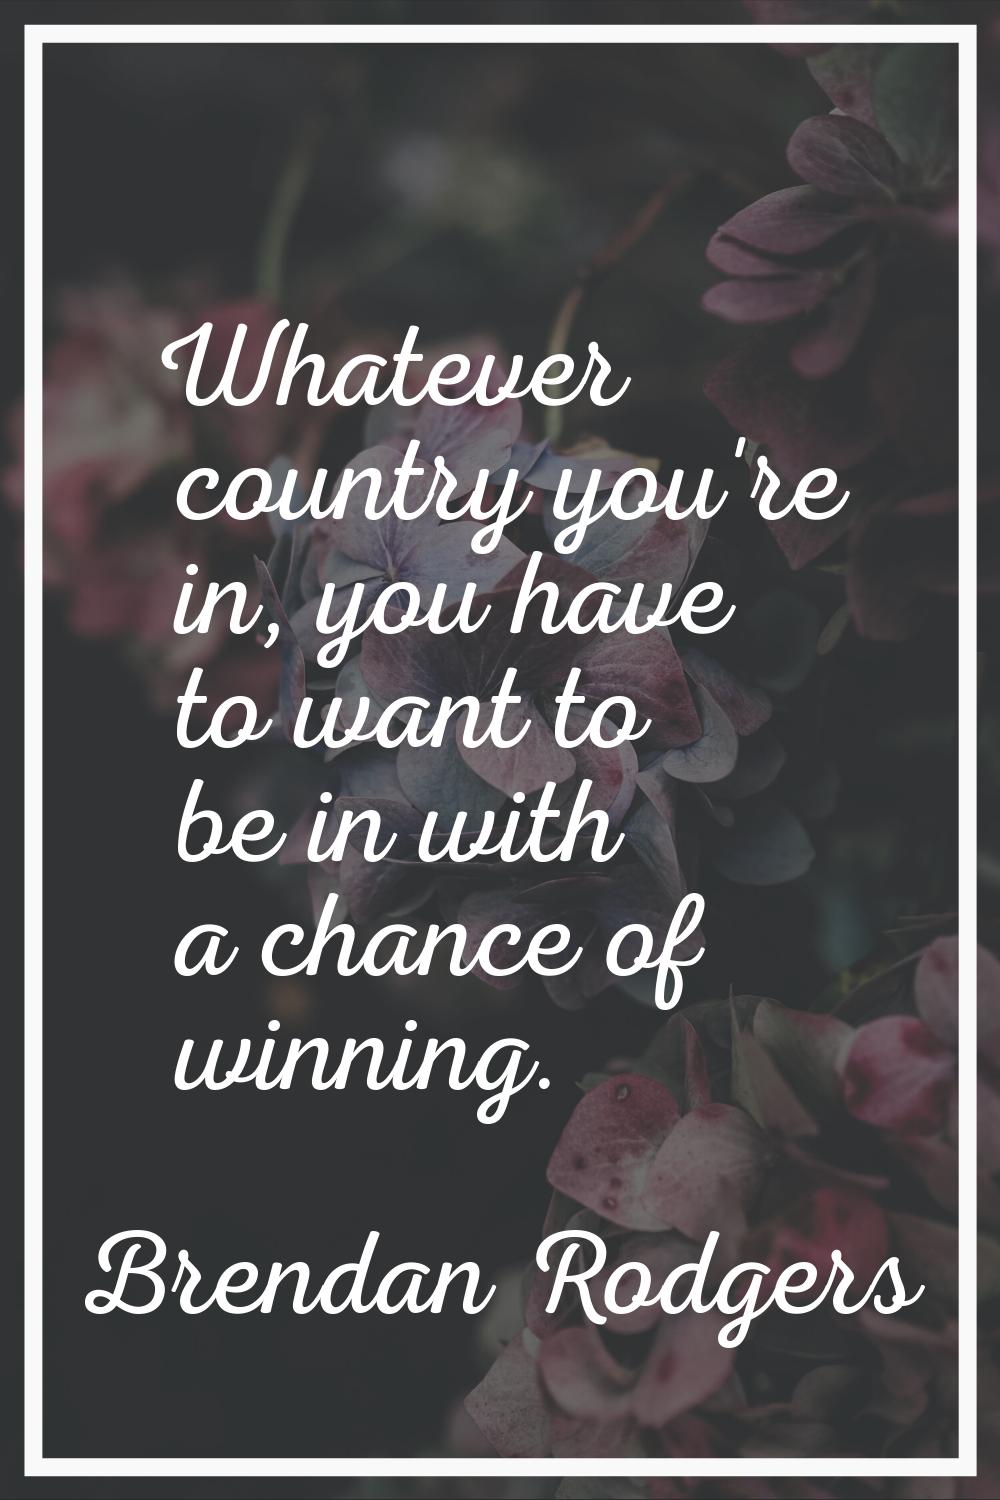 Whatever country you're in, you have to want to be in with a chance of winning.